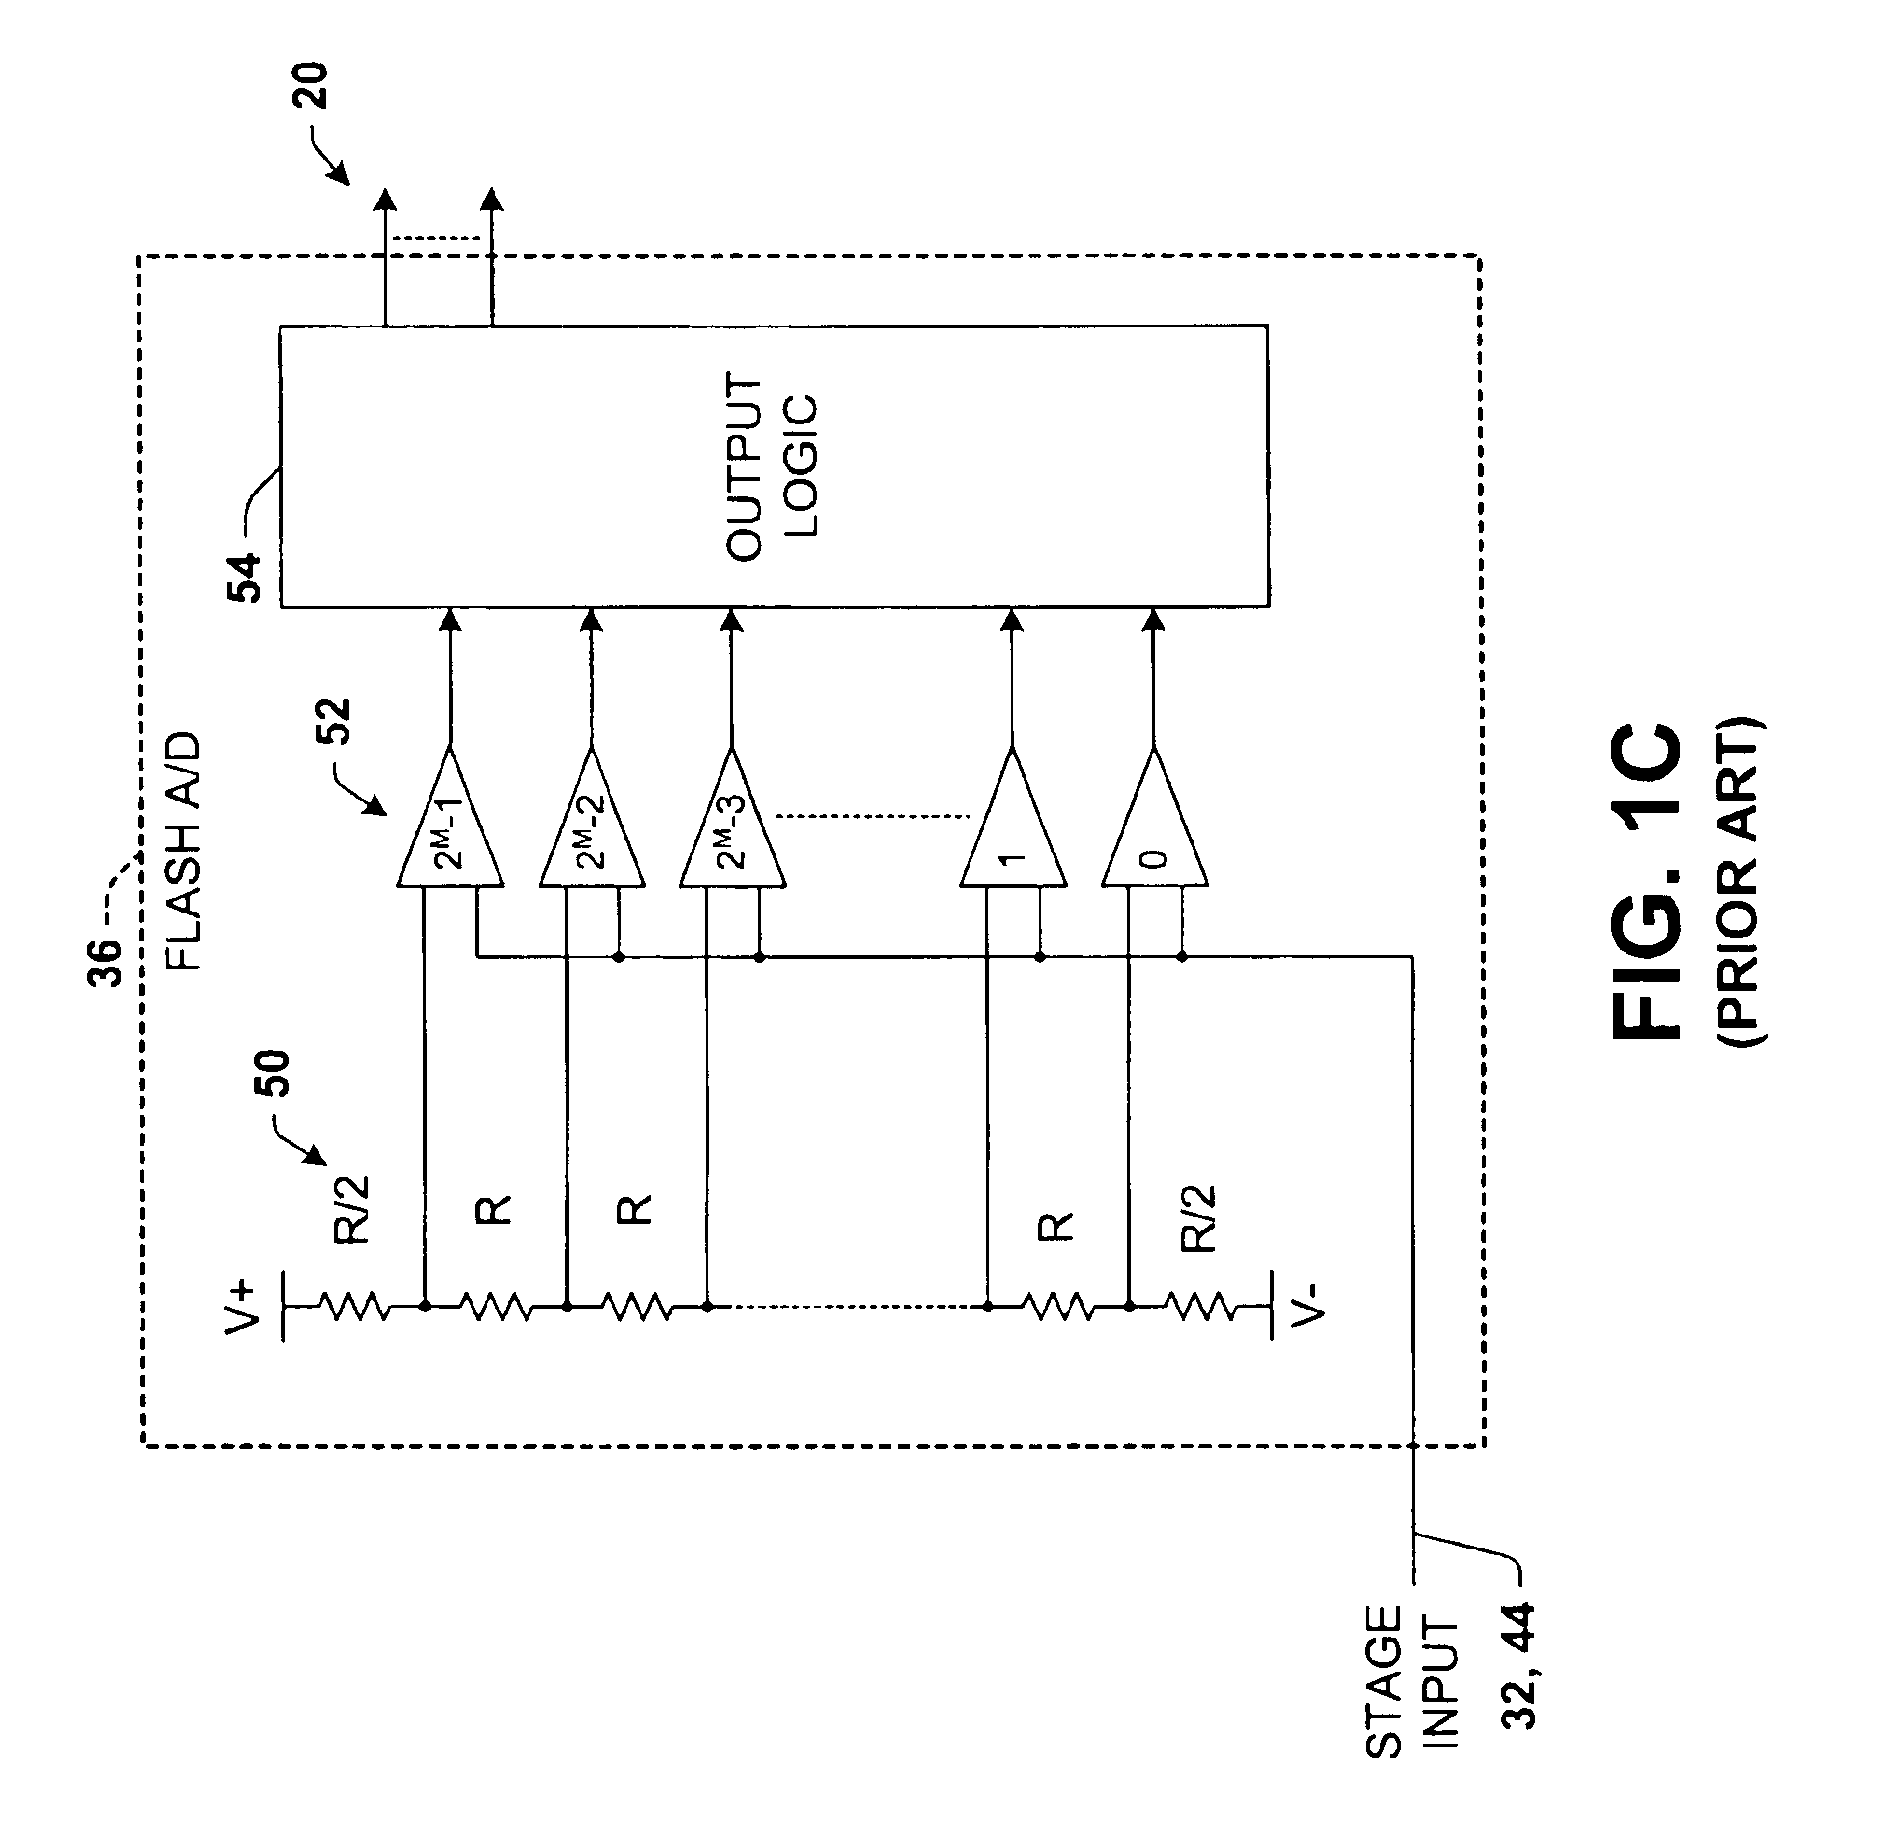 Differential pipelined analog to digital converter with successive approximation register subconverter stages using thermometer coding